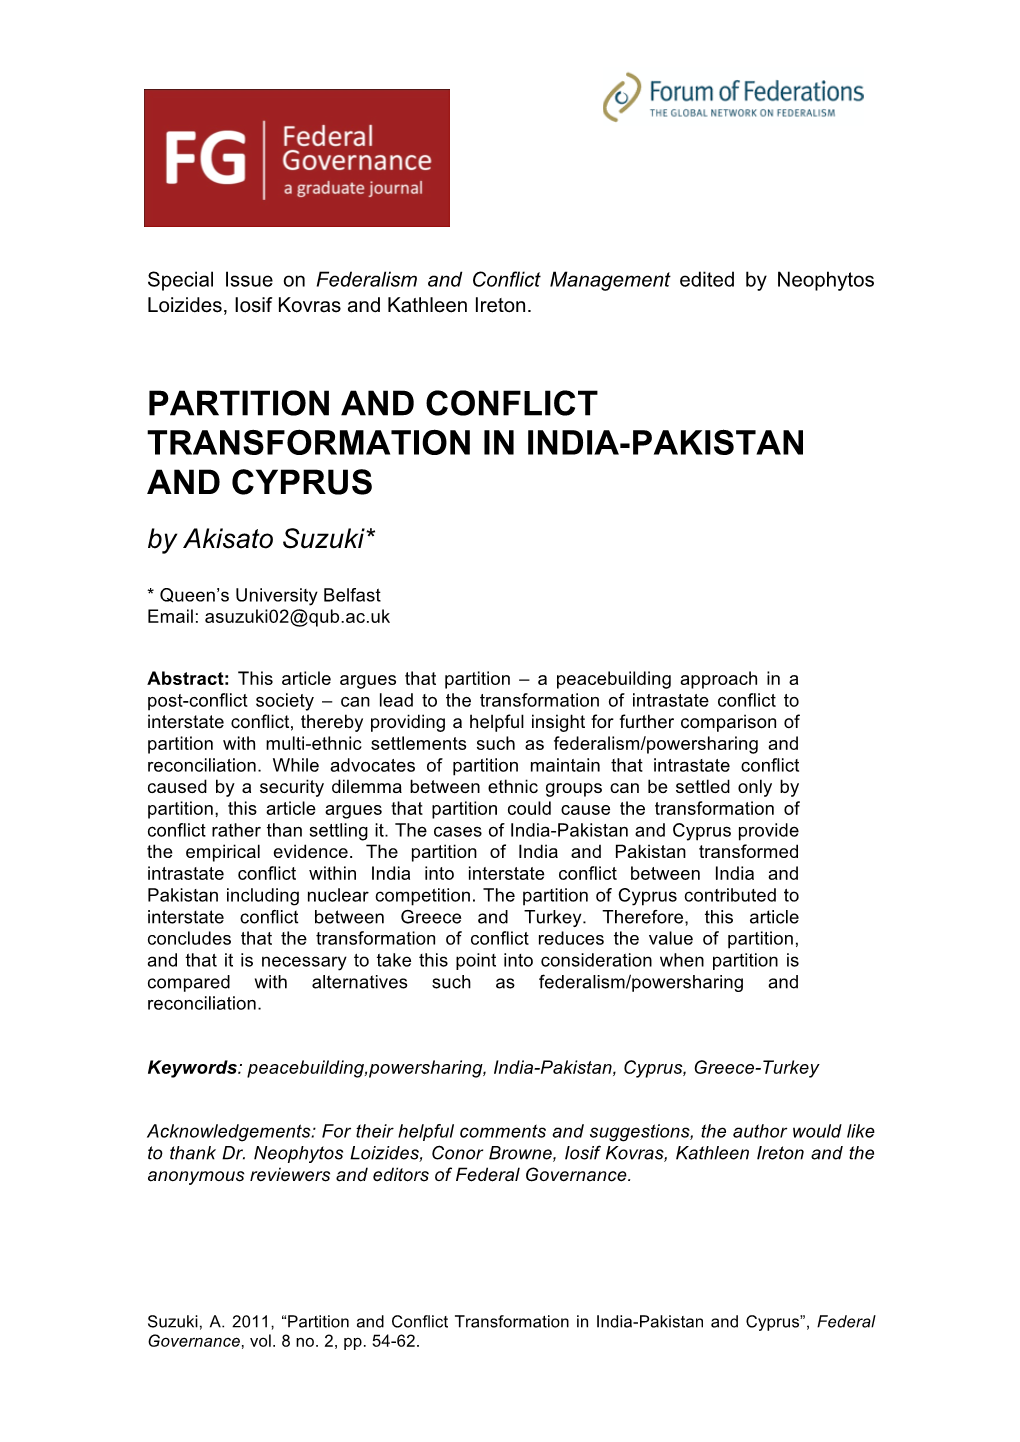 PARTITION and CONFLICT TRANSFORMATION in INDIA-PAKISTAN and CYPRUS by Akisato Suzuki*